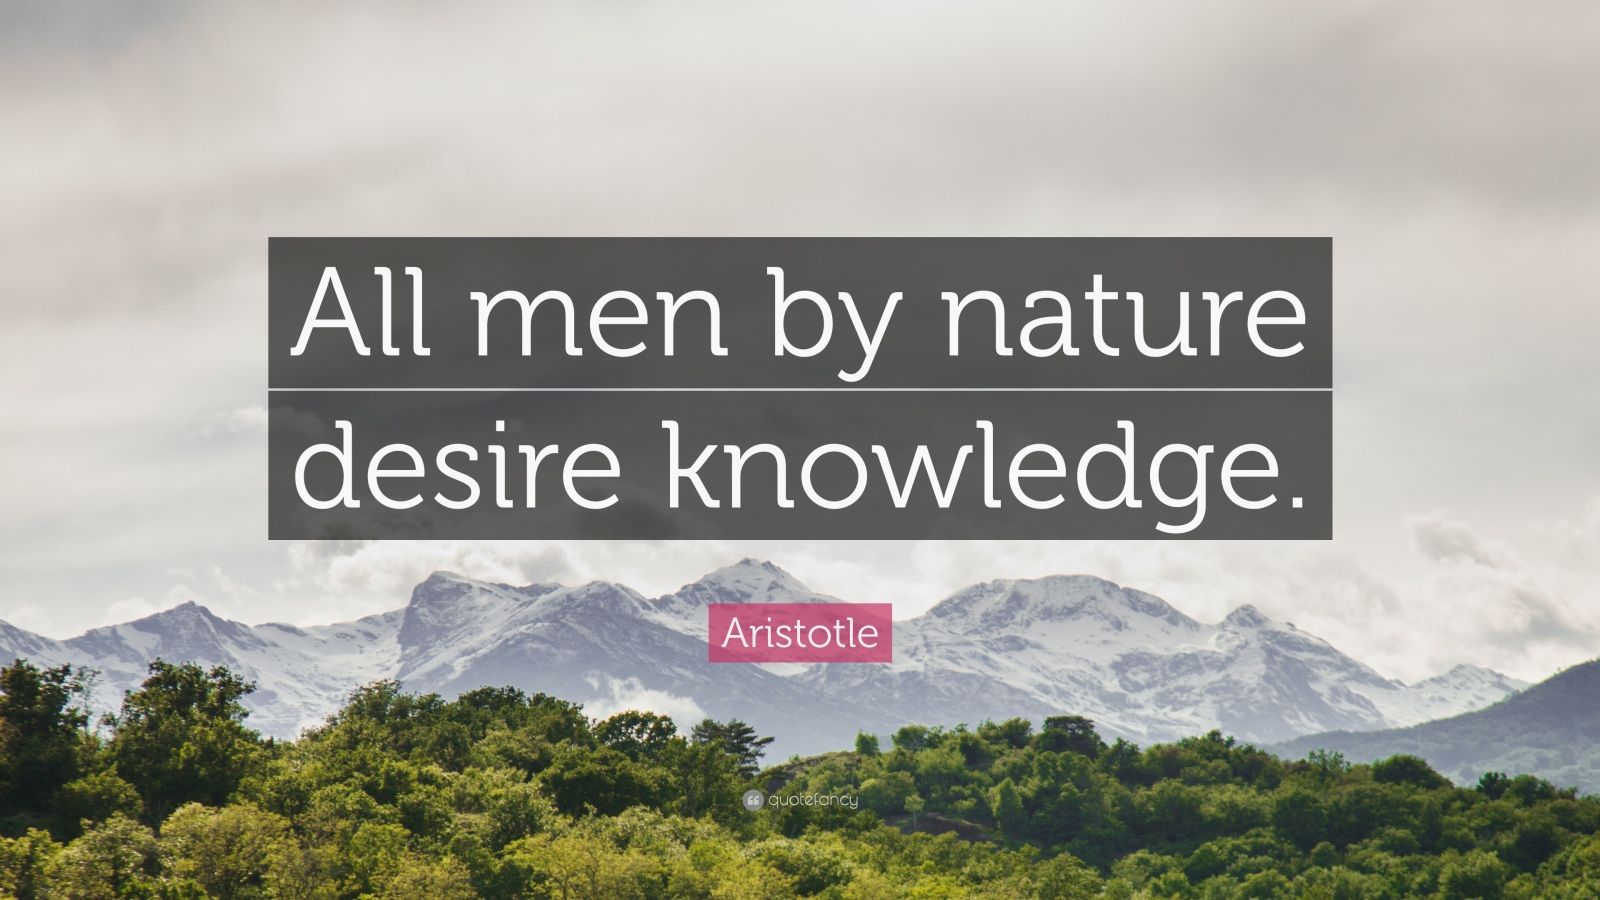 Quote: “All by desire knowledge.”